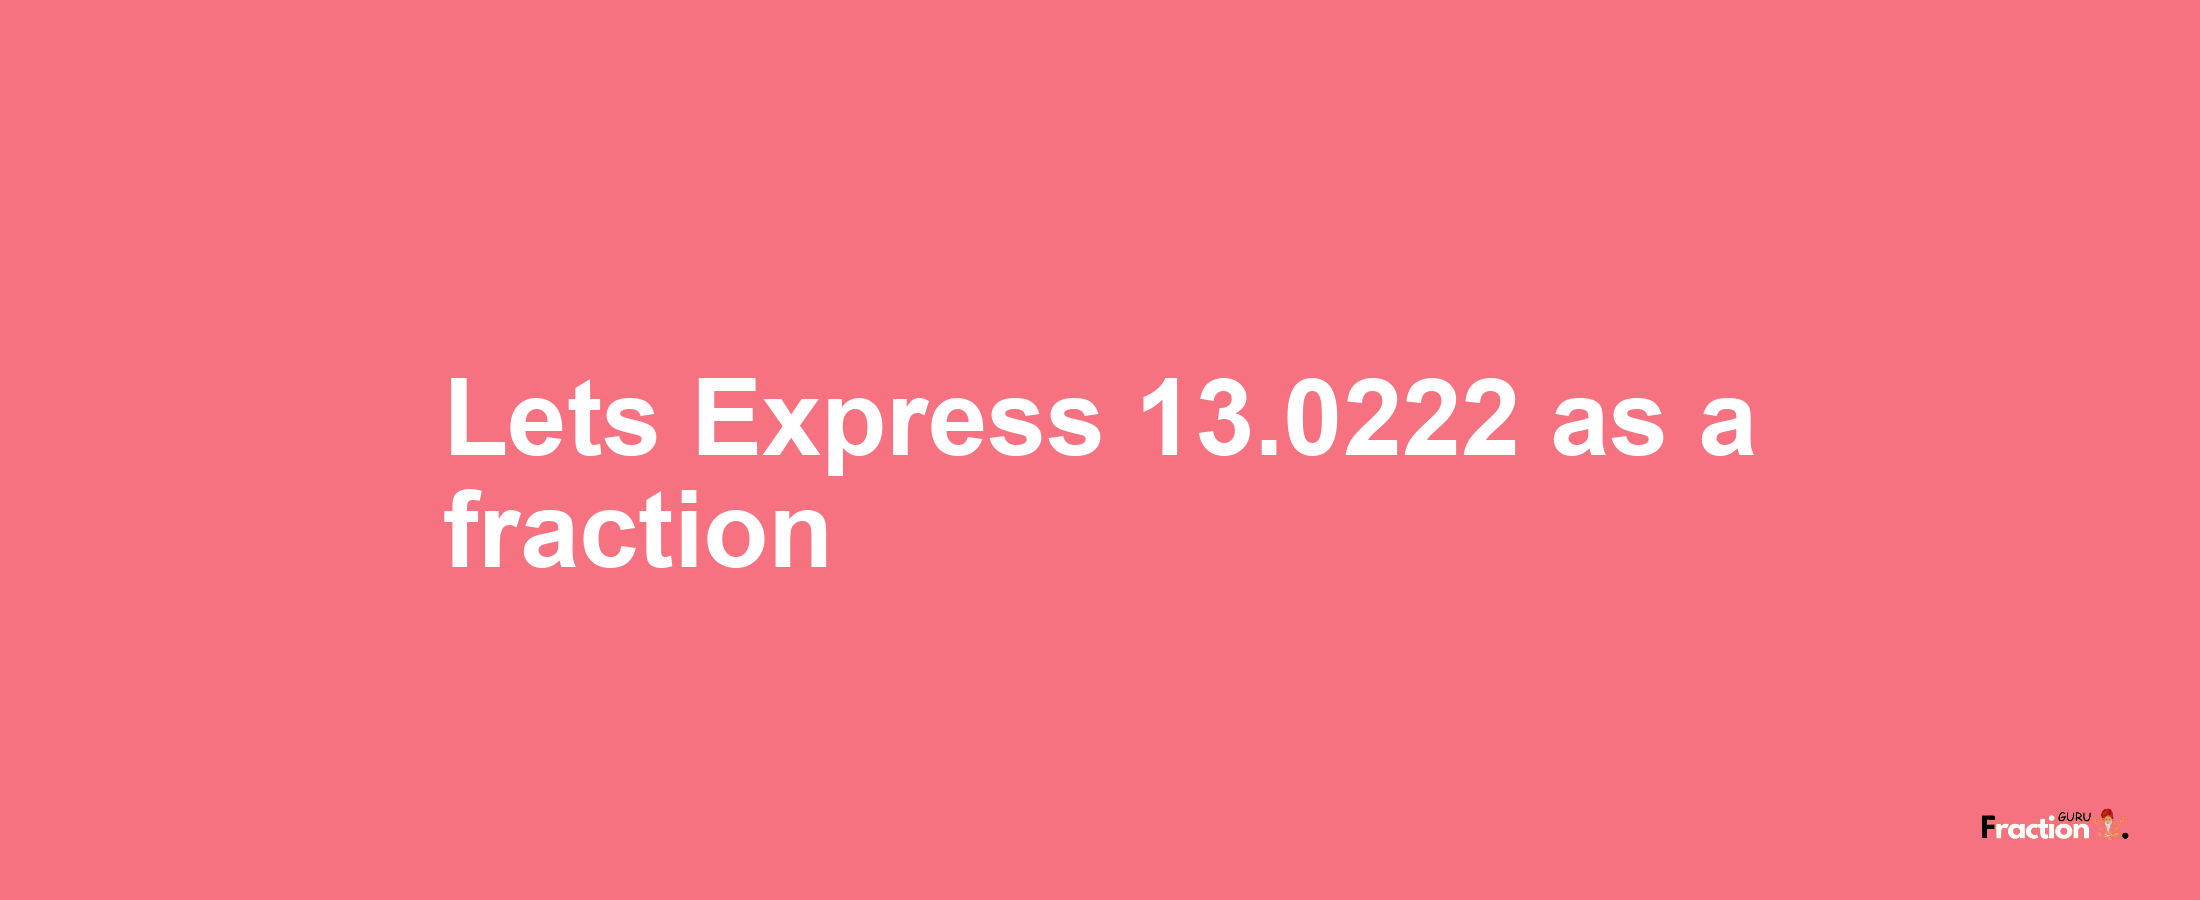 Lets Express 13.0222 as afraction